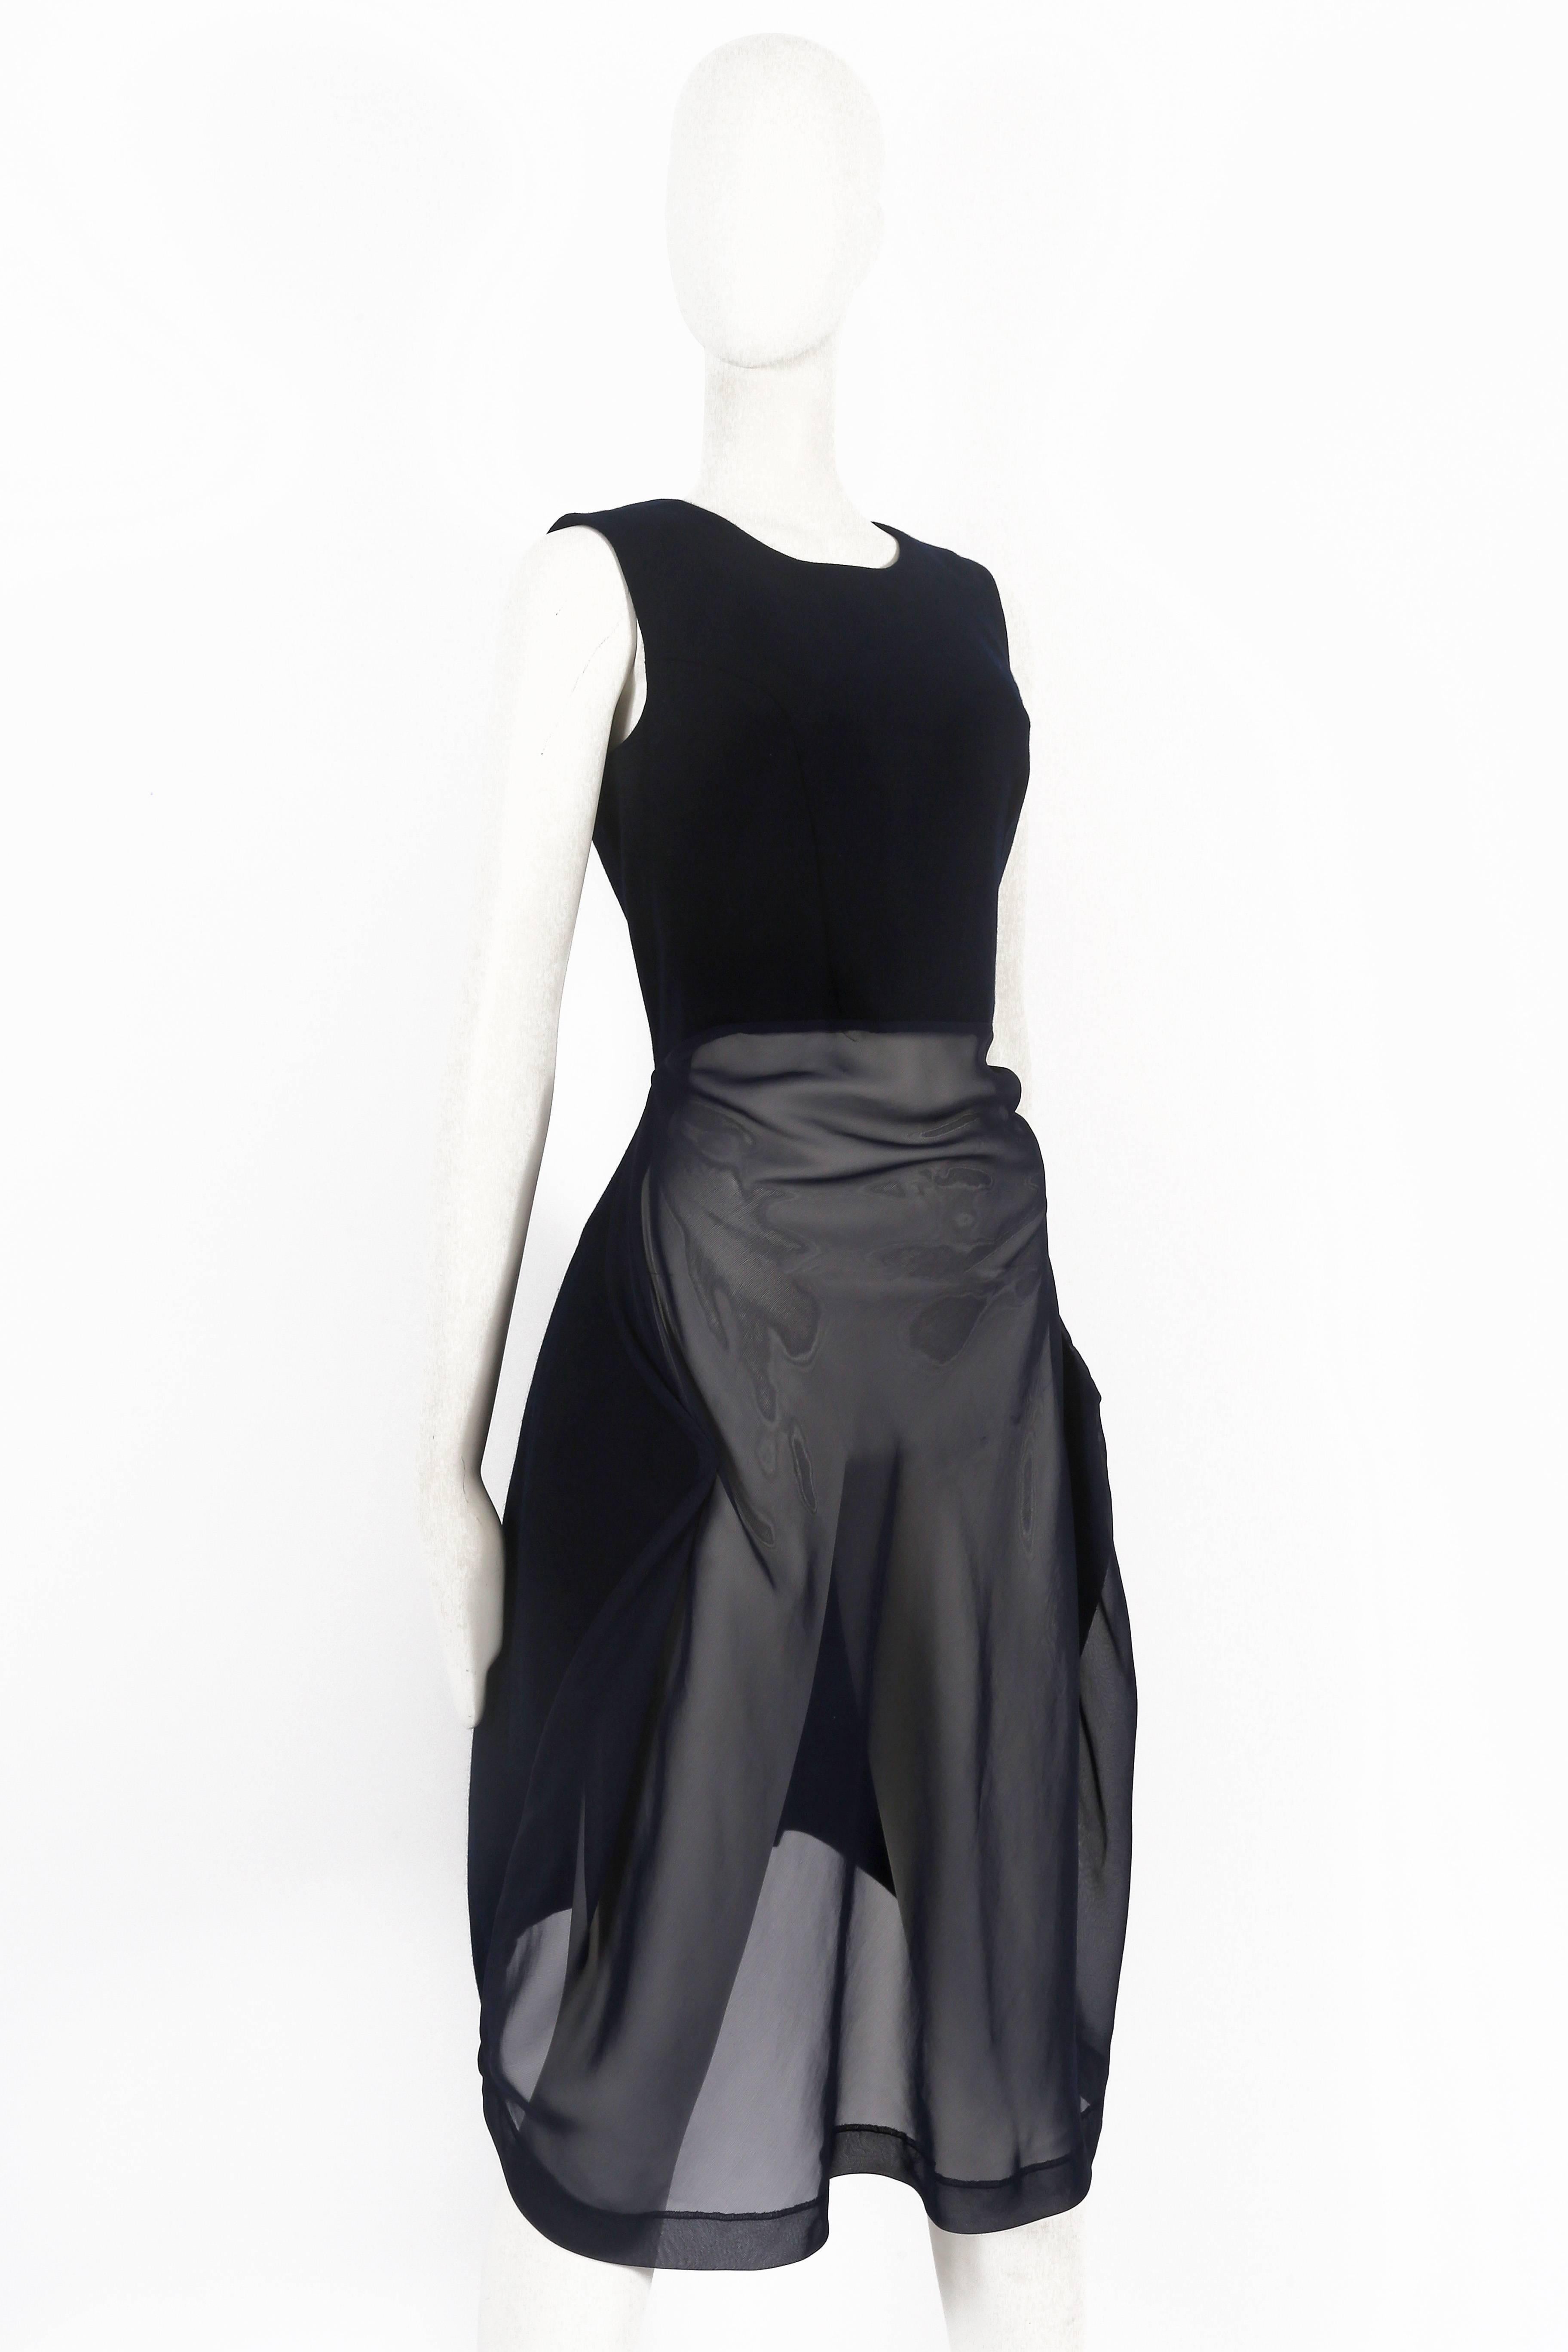 Comme des Garcons deconstructed wool and chiffon dress, circa 1997 For ...